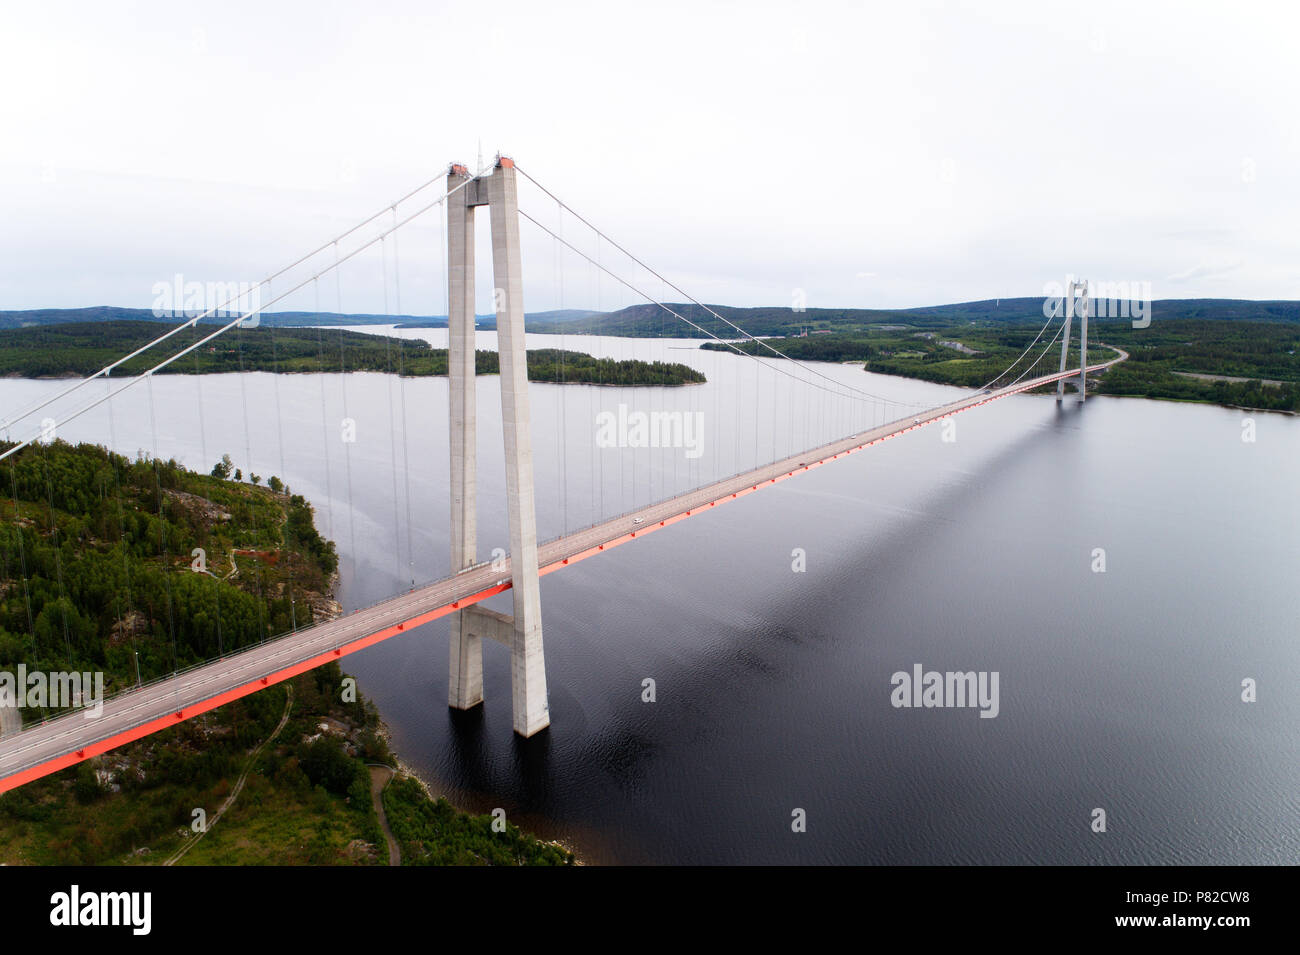 Aerial view of the High coast bridge seen from North. It is a road suspension bridge for the highway E4 over river Angermanalven i Northern Sweden. Stock Photo